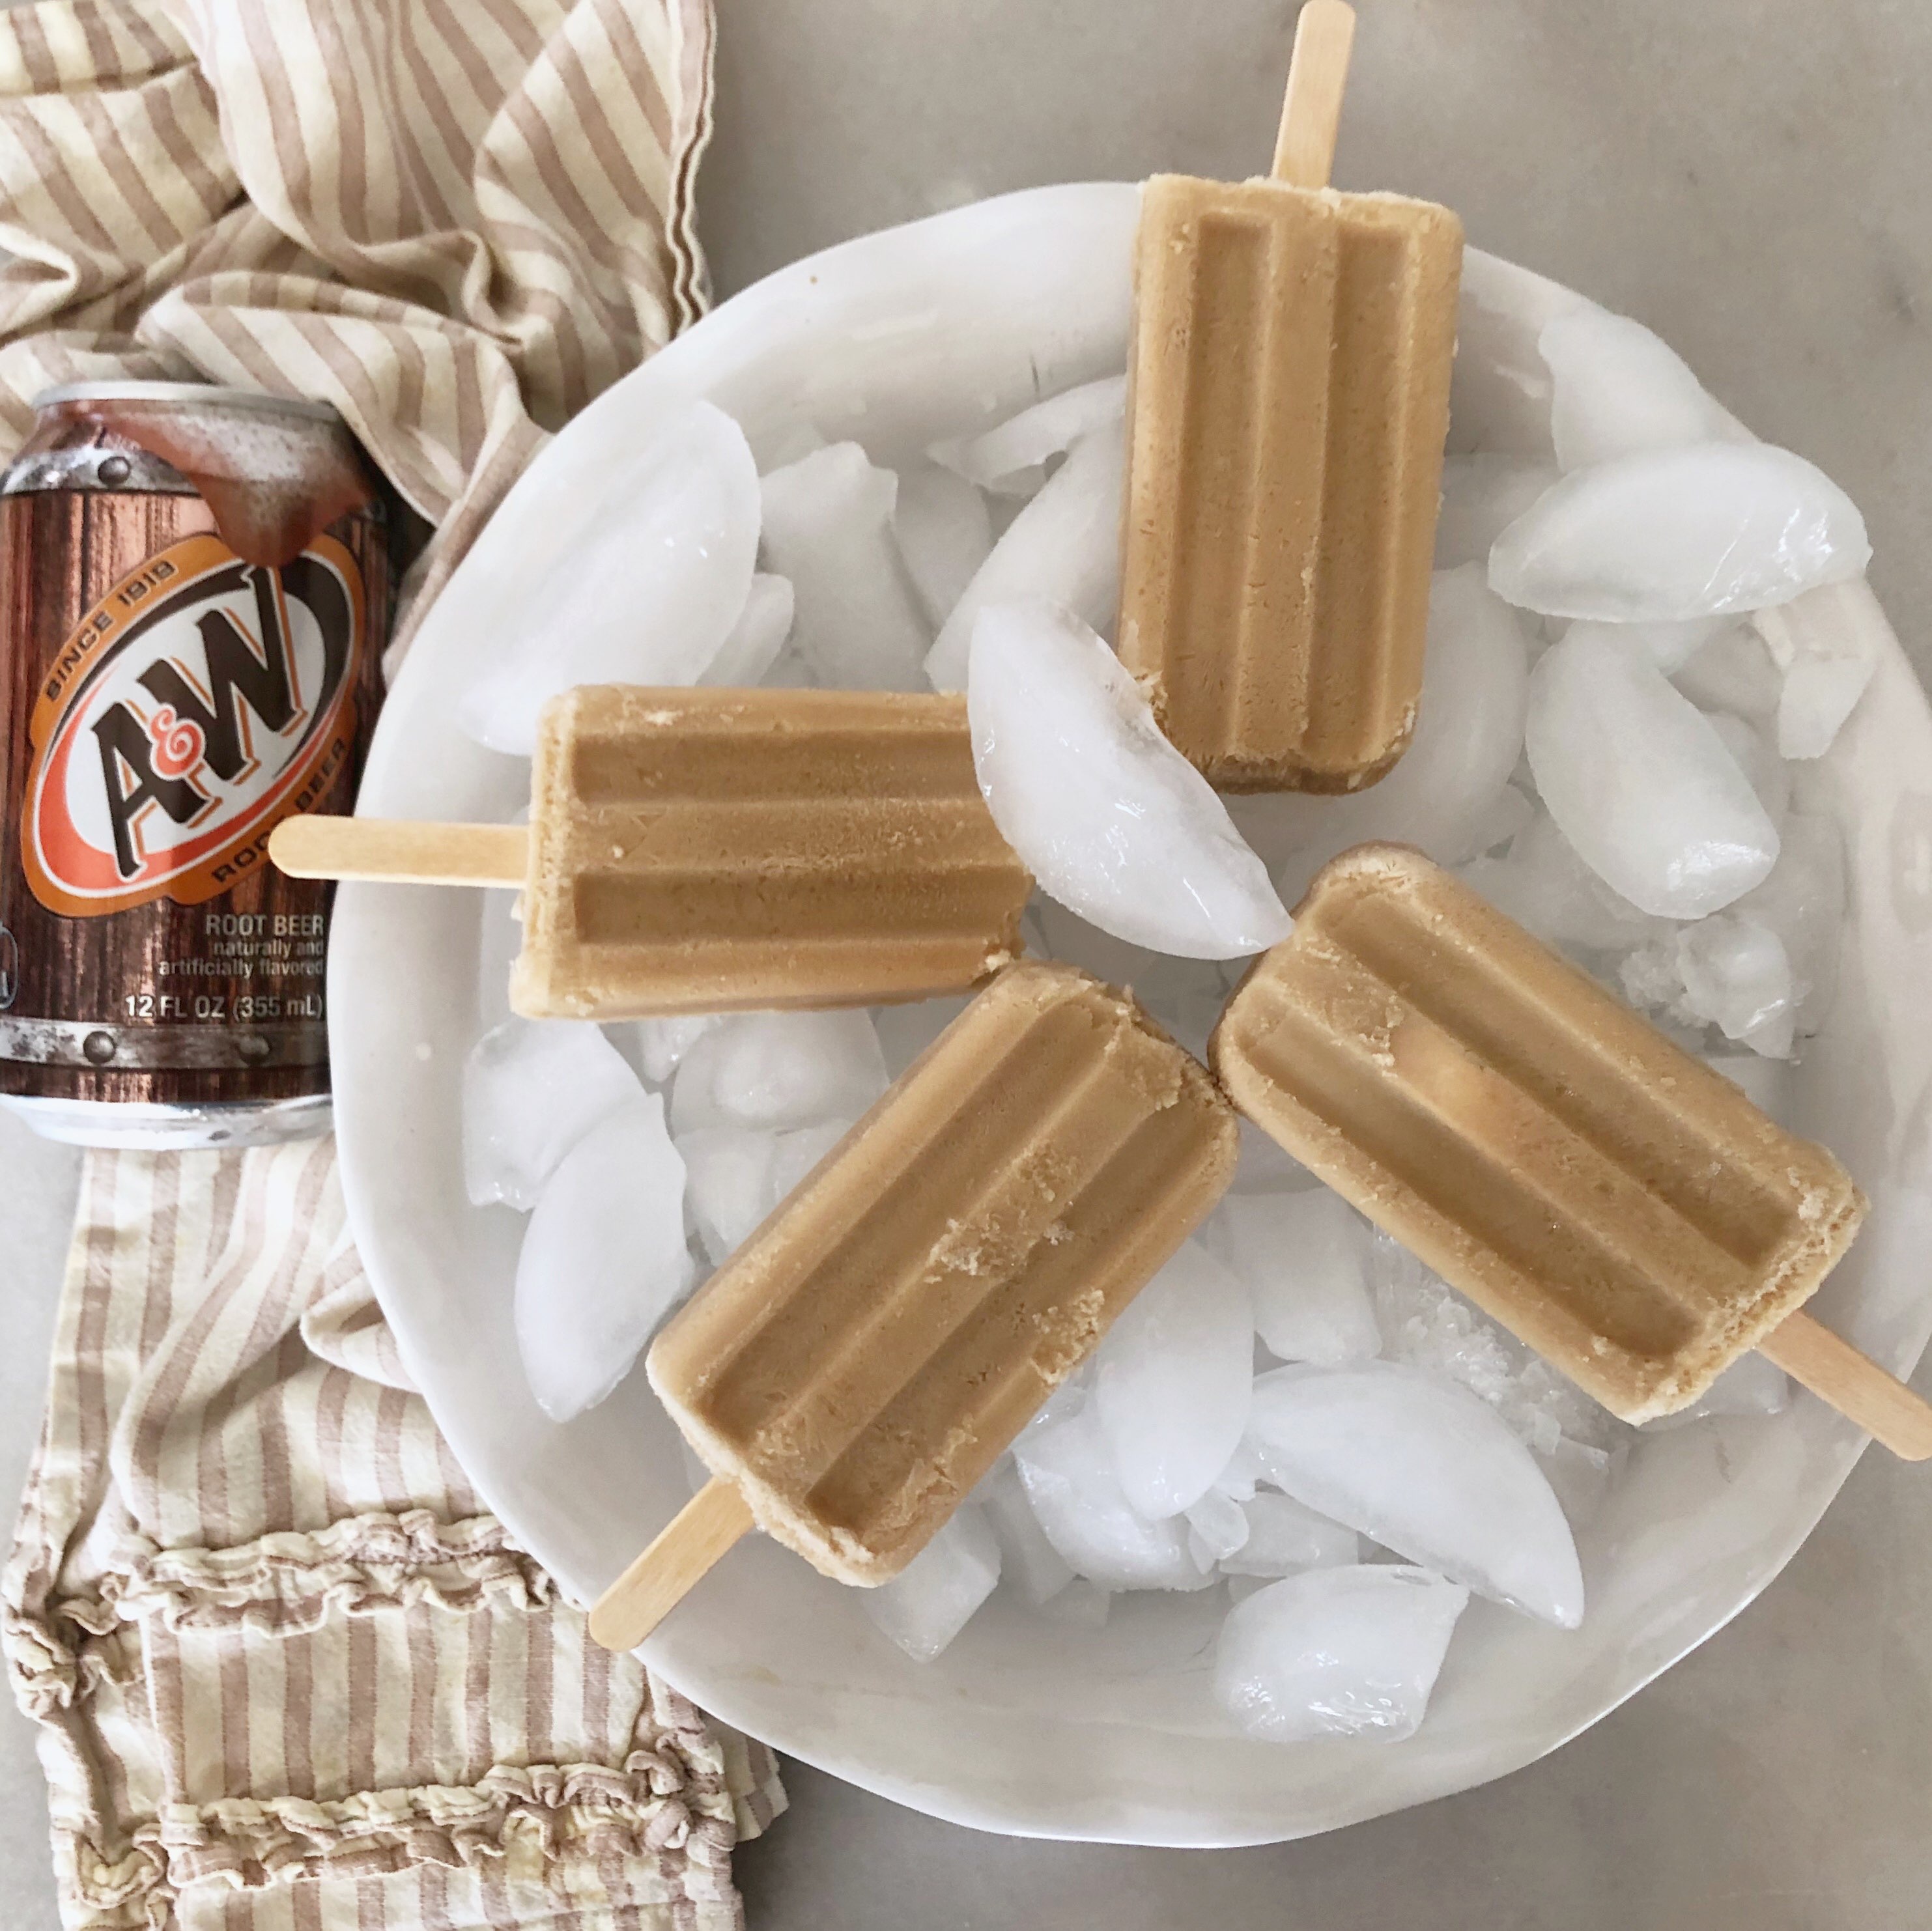 4 rootbeer popsicles on ice with can of A & W rootbeer